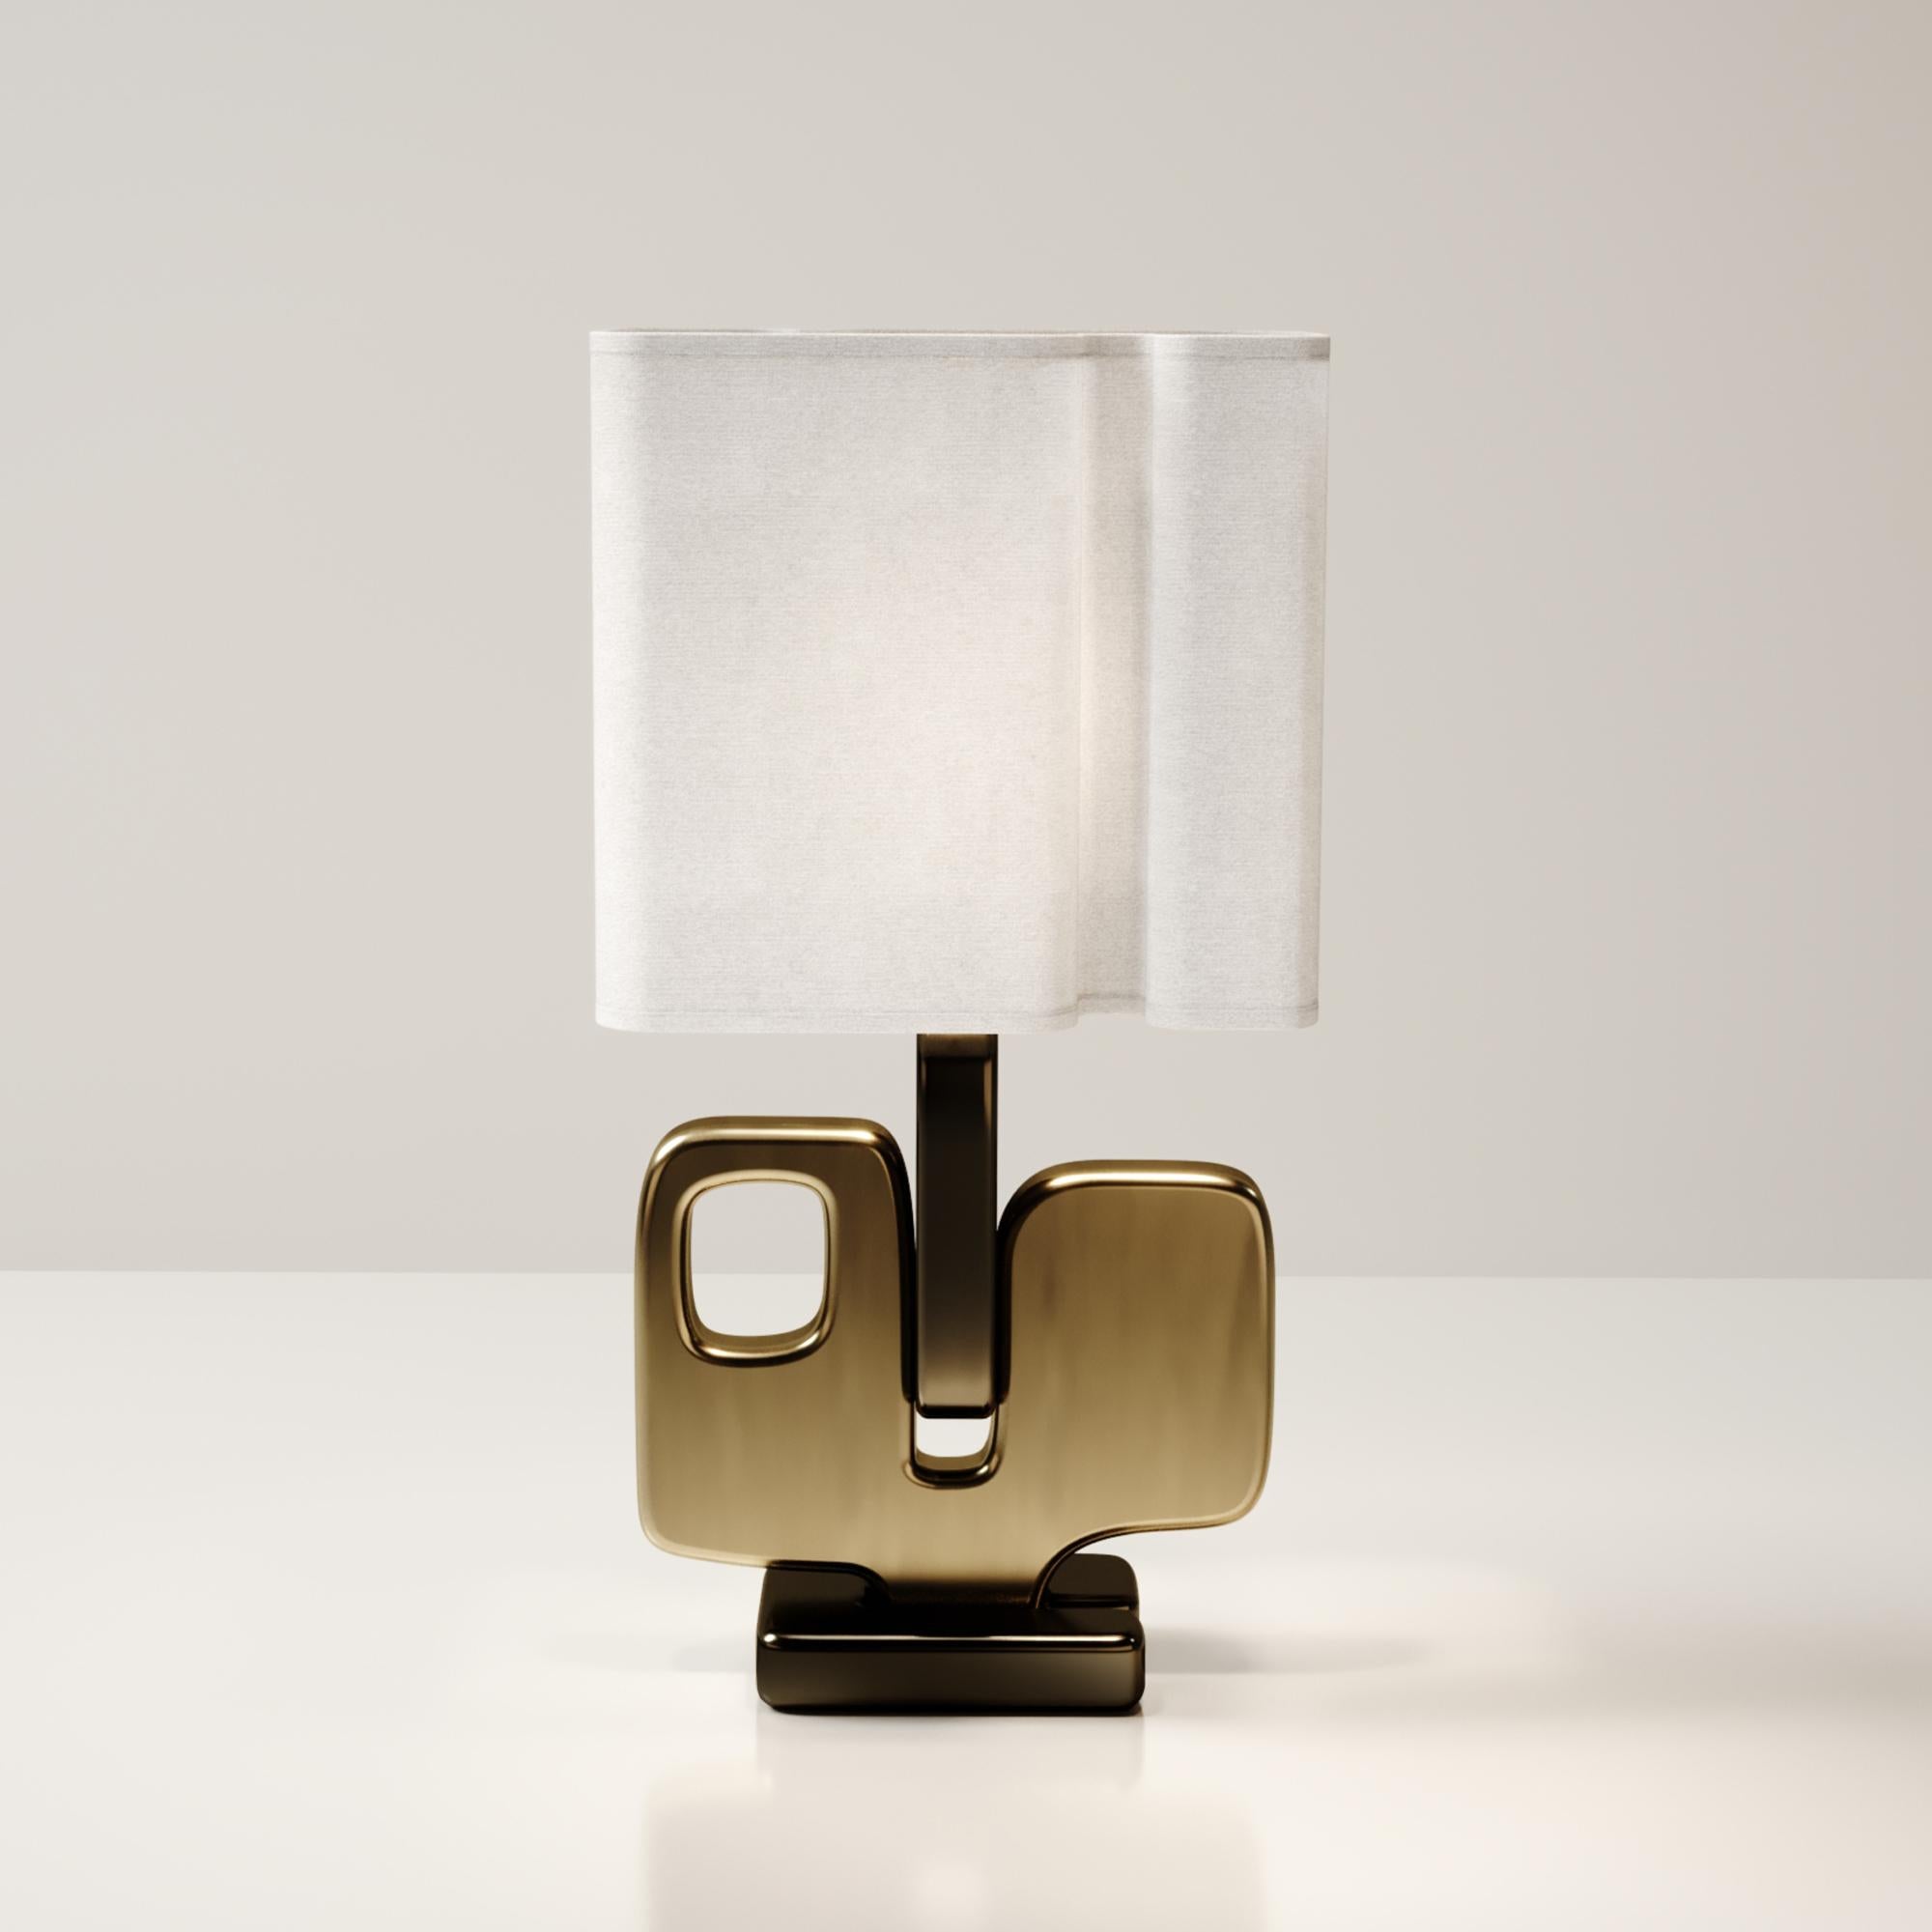 The Apoli table lamp by Kifu Paris is both dramatic and organic it’s unique design. The ethereal geometric and sculptural base is made entirely from bronze-patina brass. This piece is designed by Kifu Augousti the daughter of Ria and Yiouri